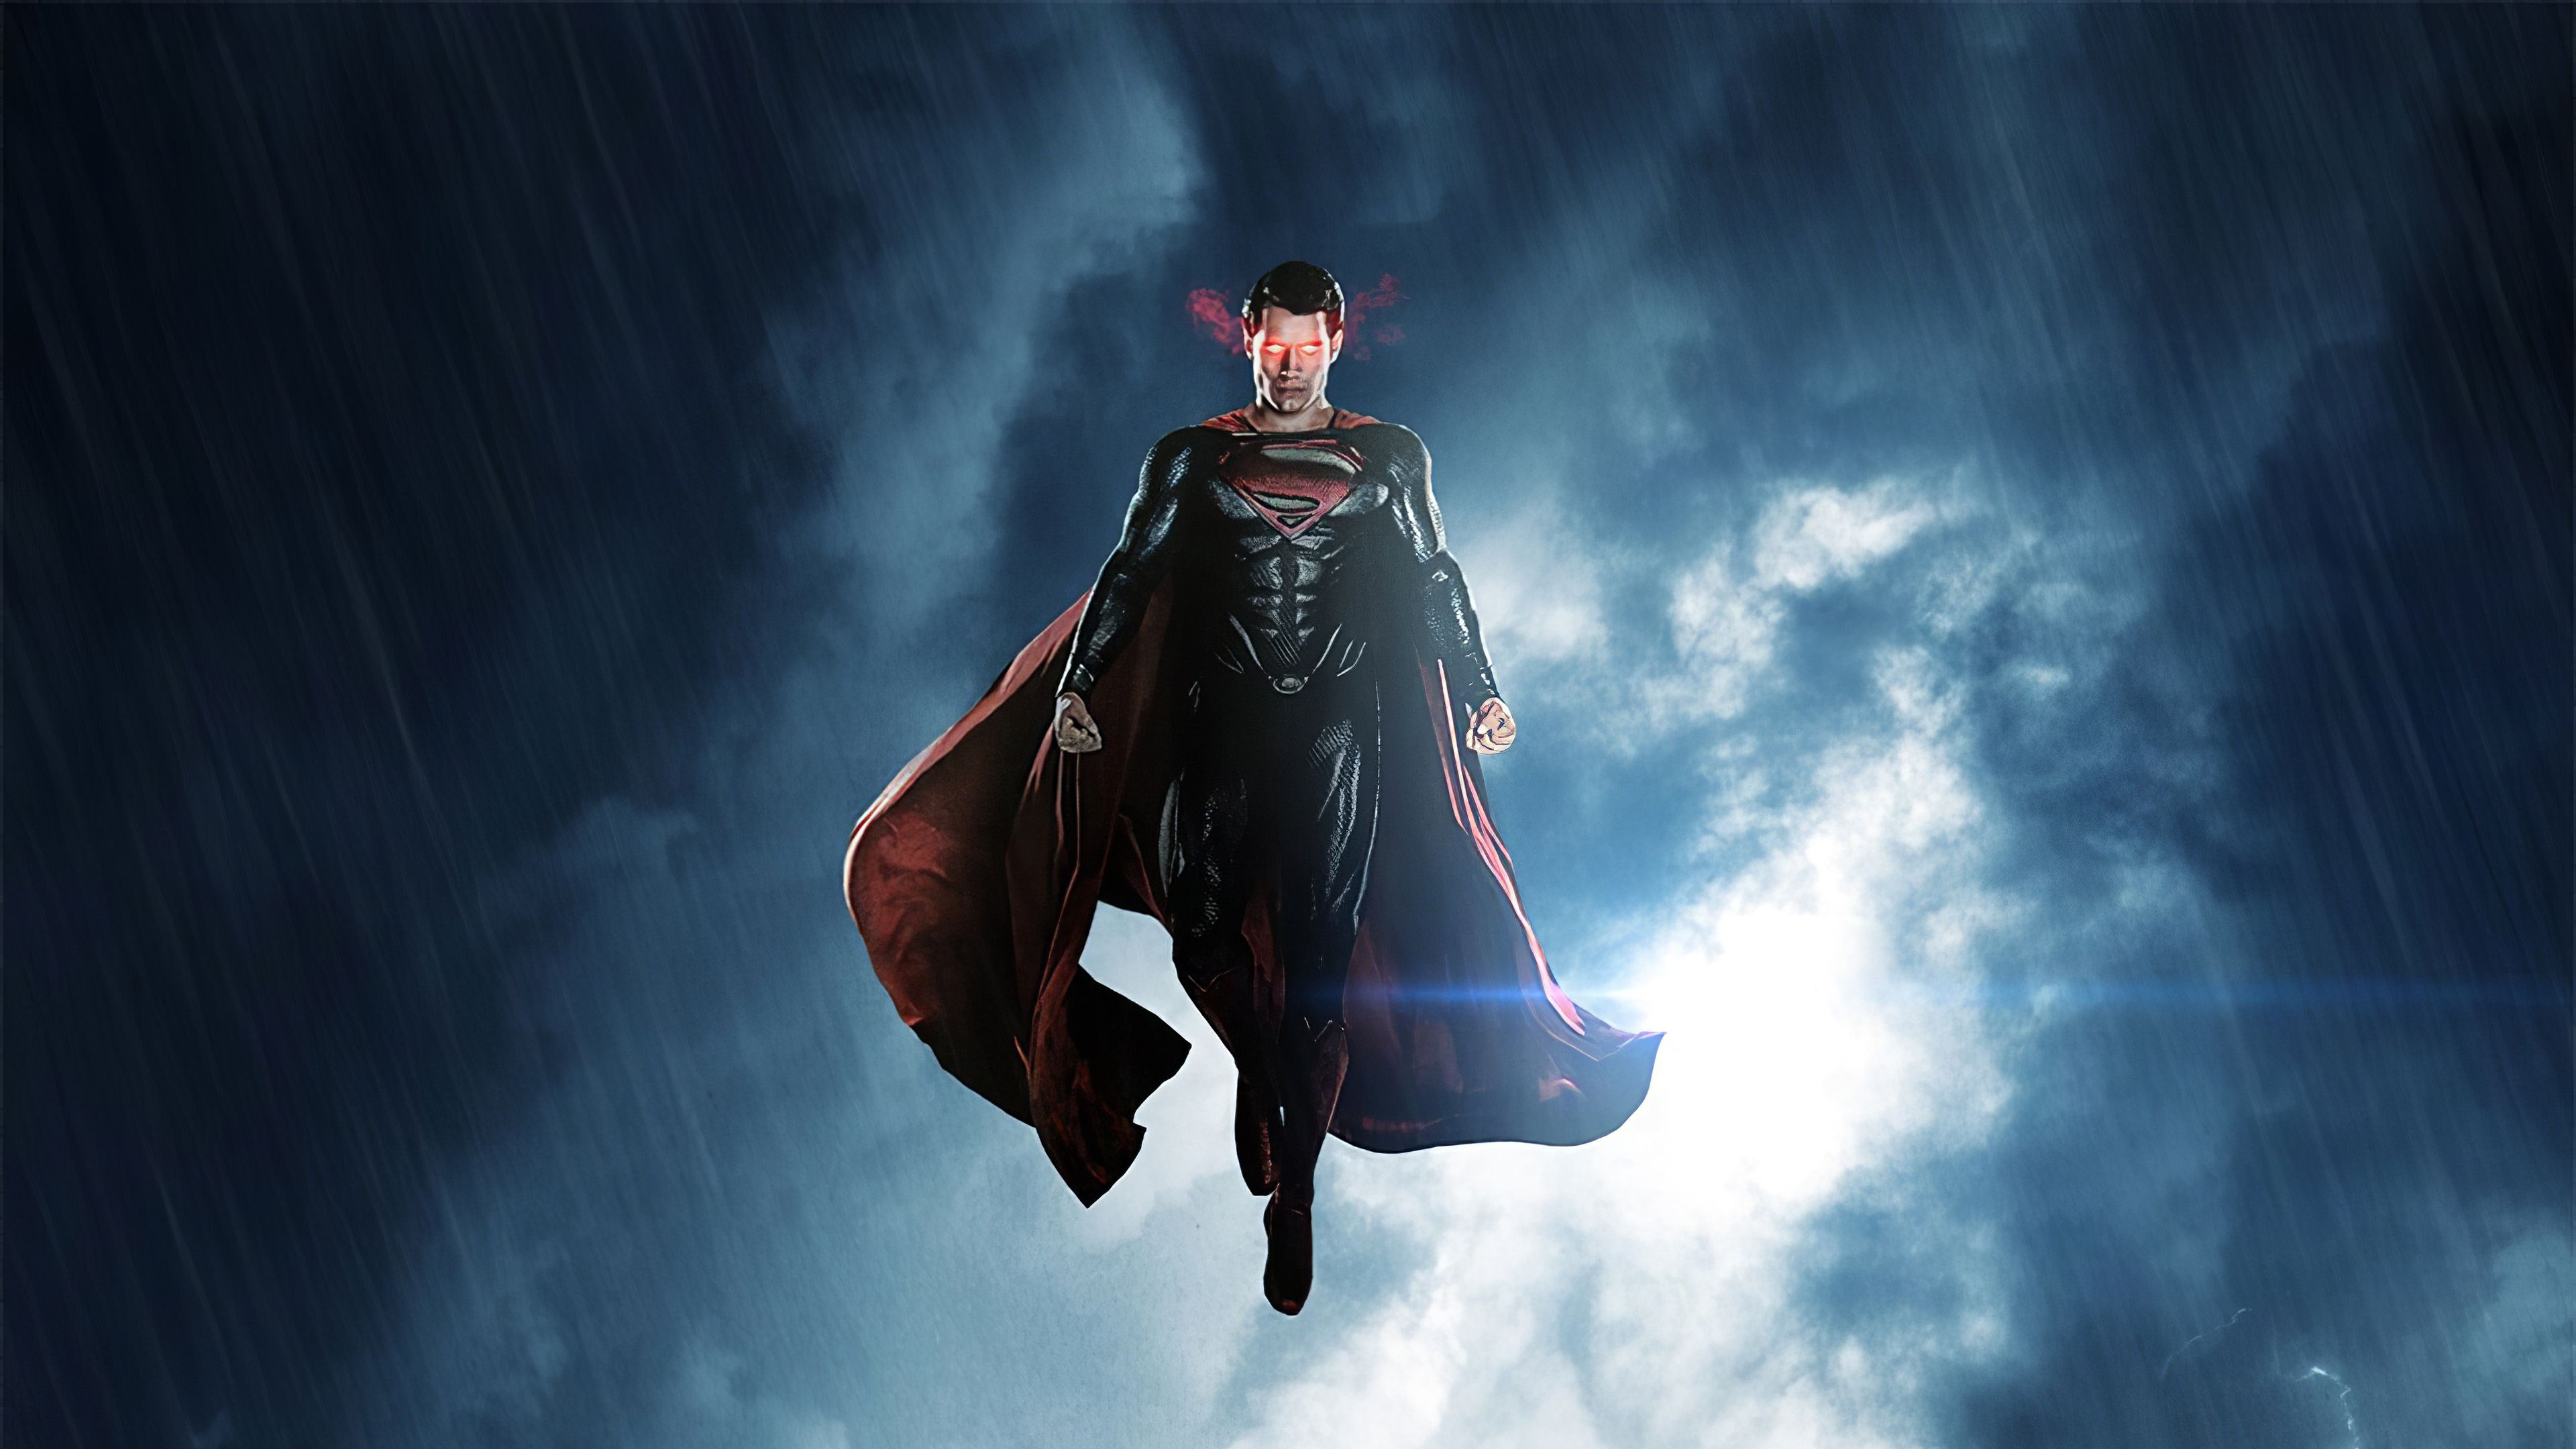 APPRECIATION: A few of my favorite wallpapers of Henry Cavill Superman!  Happy 10th Anniversary to Man Of Steel! : r/DC_Cinematic